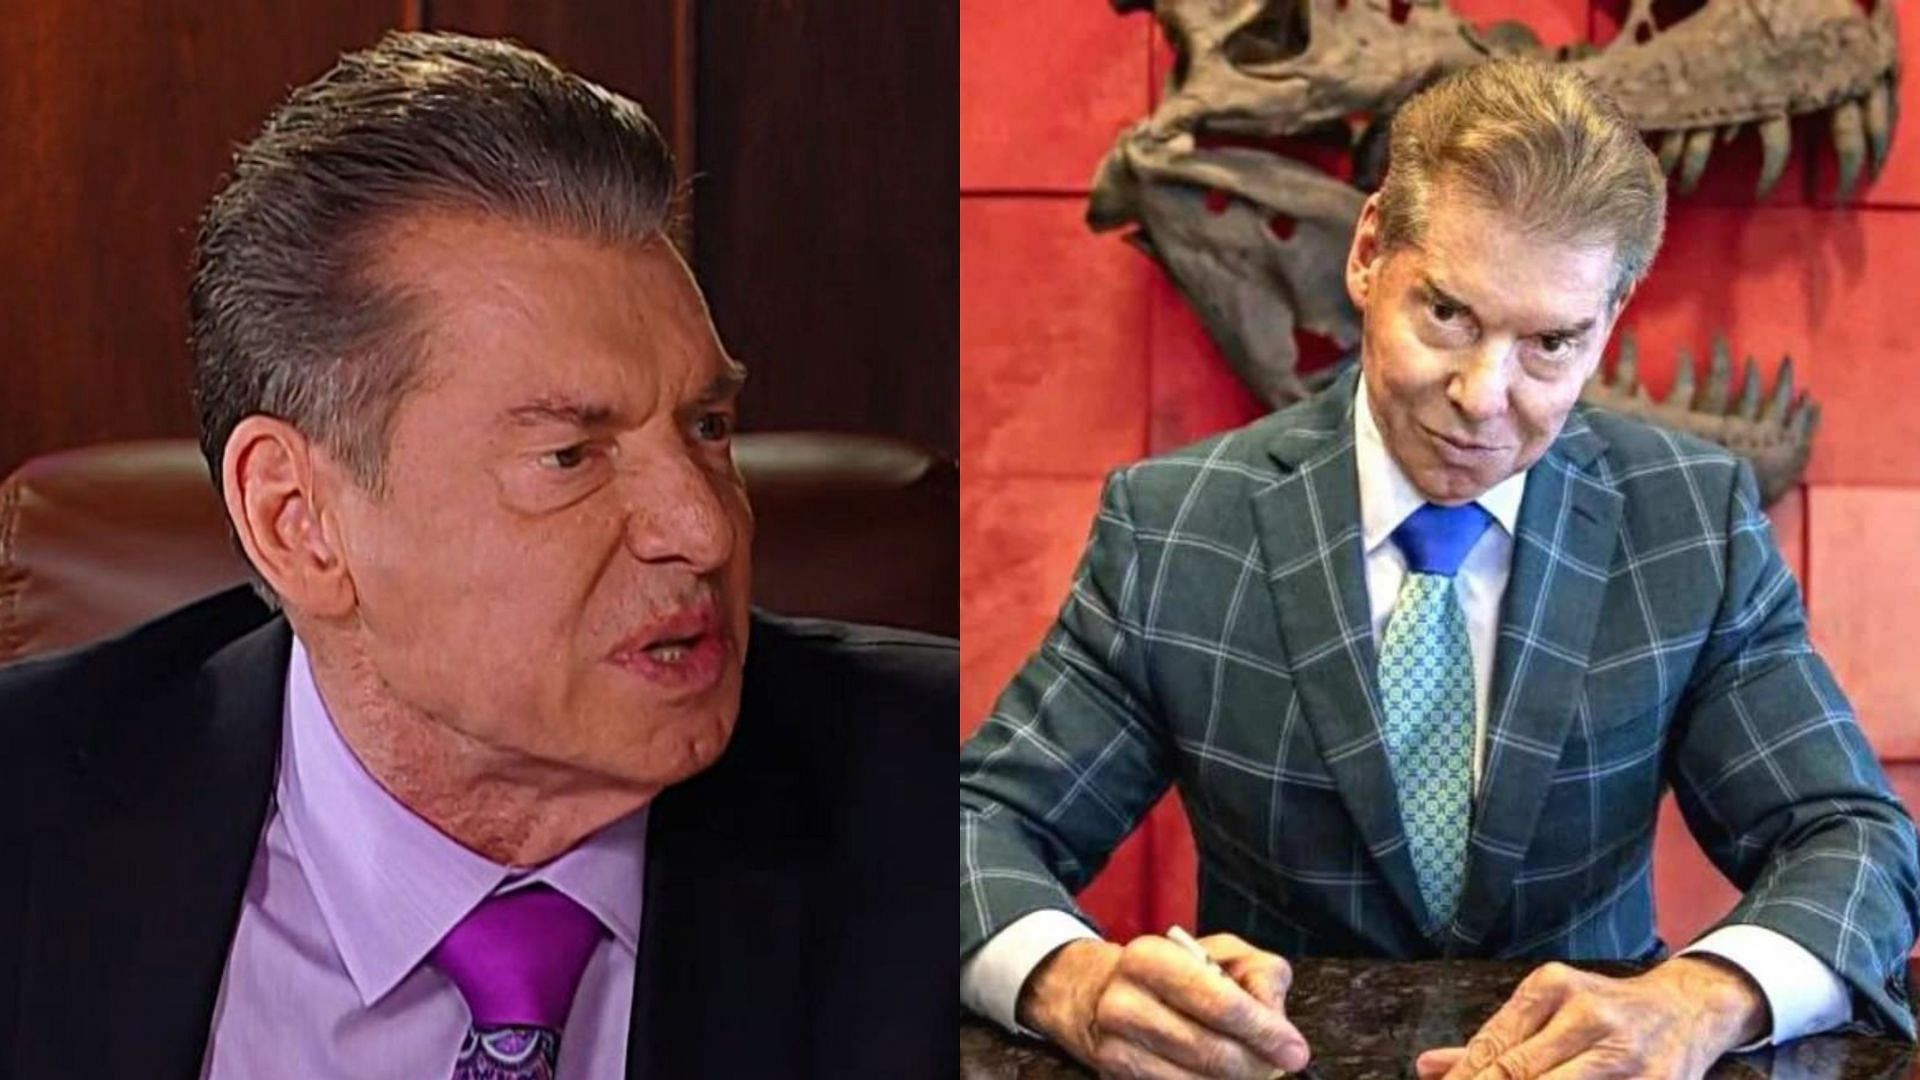 Vince McMahon retired from WWE earlier this year